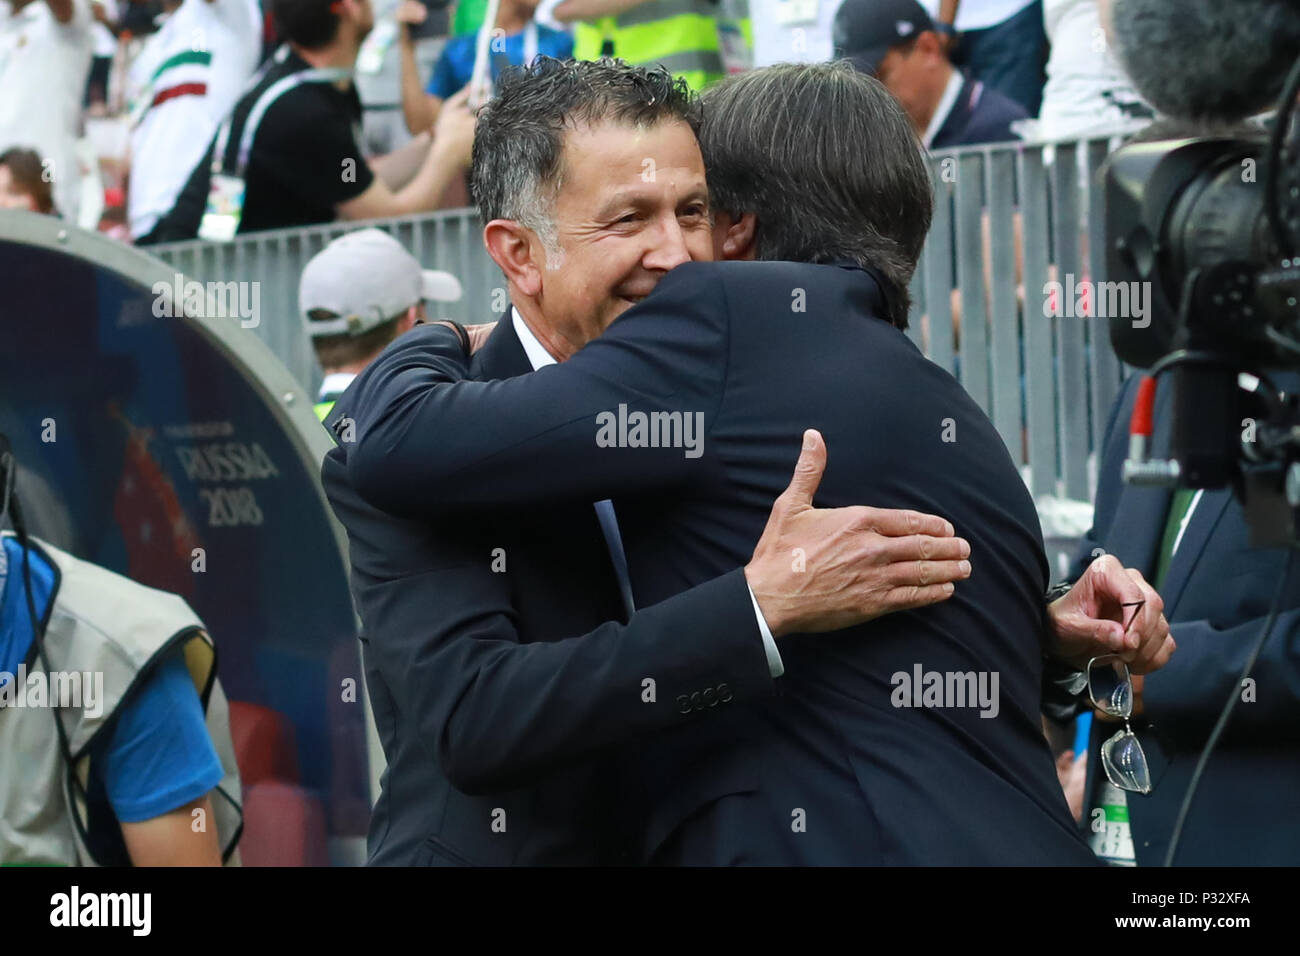 Moscow, Russia, 17 June 2018.GERMANY VS MEXICO - Juan Carlos Osorio greets Joachim Low during the match between Germany and Mexico valid for the 2018 World Cup held at the Lujniki Stadium in Moscow, Russia. (Photo: Ricardo Moreira/Fotoarena) Credit: Foto Arena LTDA/Alamy Live News Credit: Foto Arena LTDA/Alamy Live News Credit: Foto Arena LTDA/Alamy Live News Stock Photo